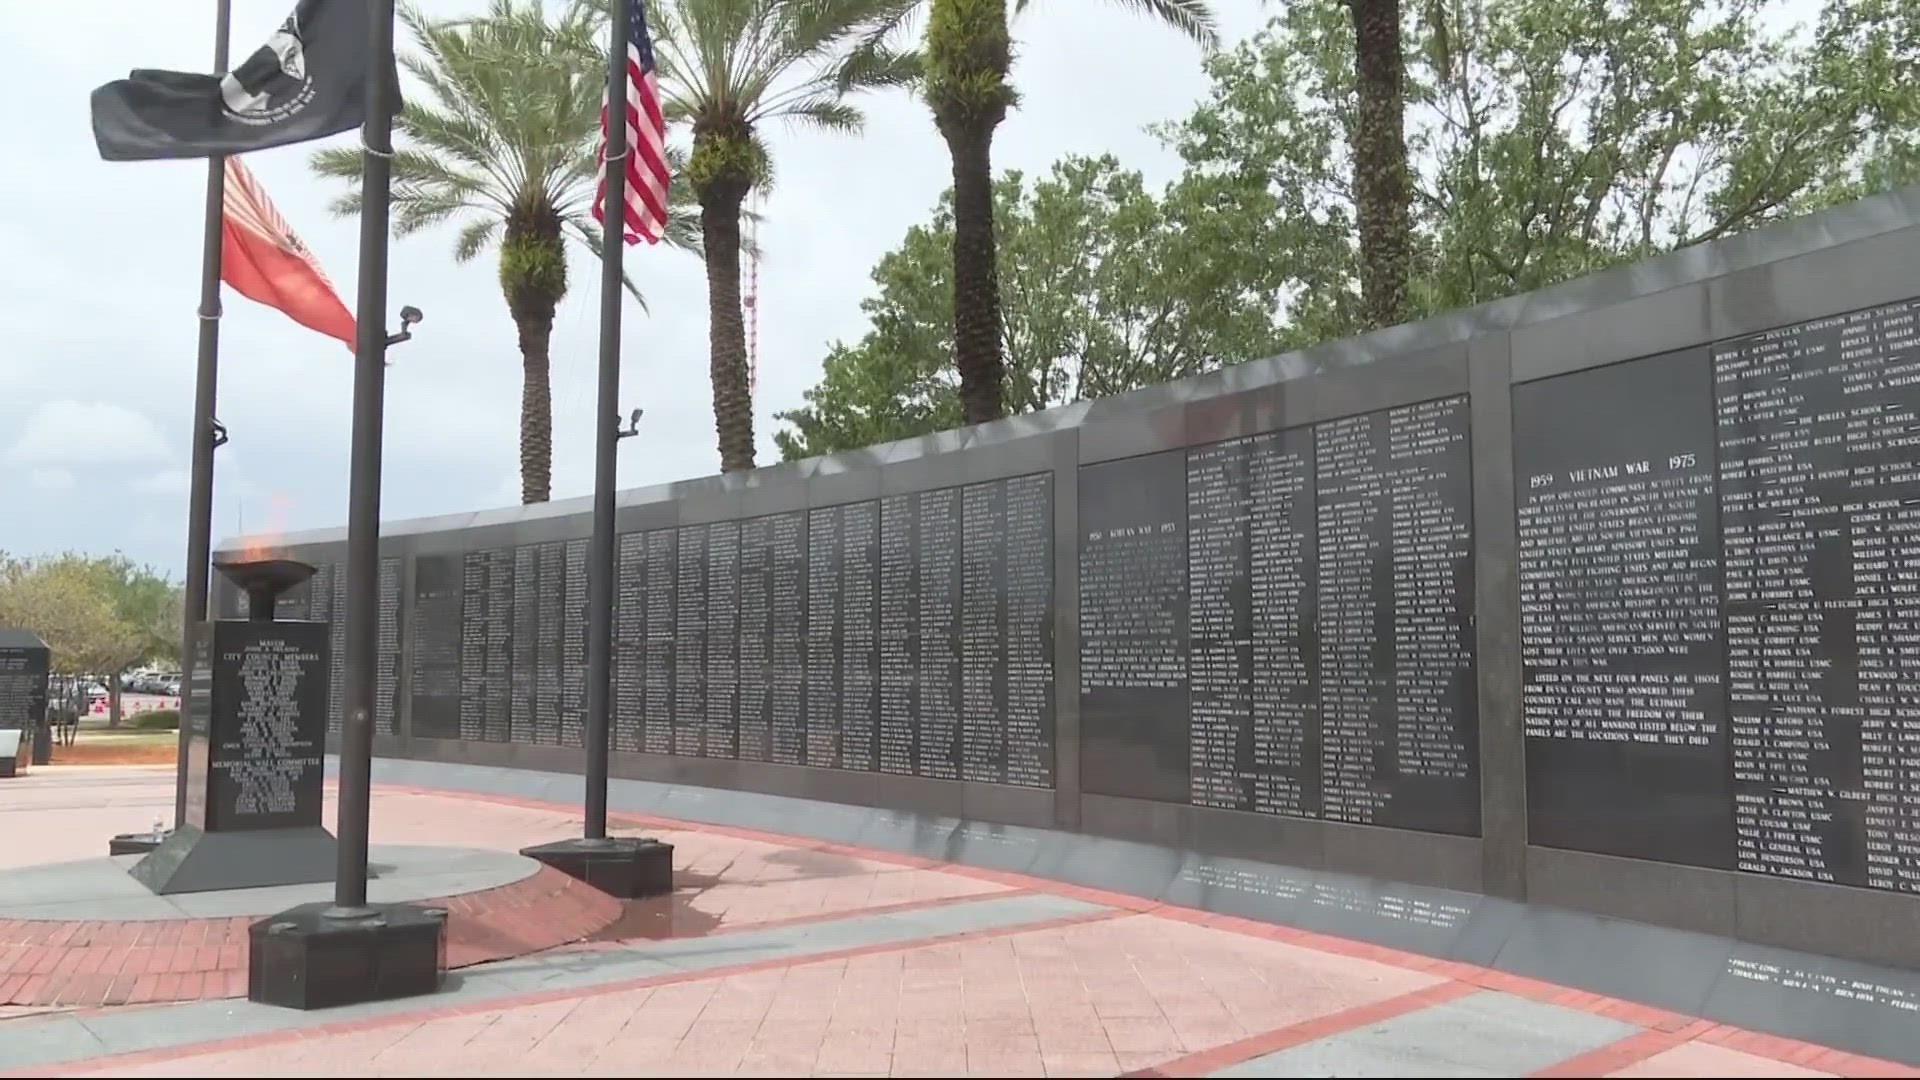 Names of more than 1,700 Jacksonville area American war heroes are engraved on the wall to remember those who died serving our country.